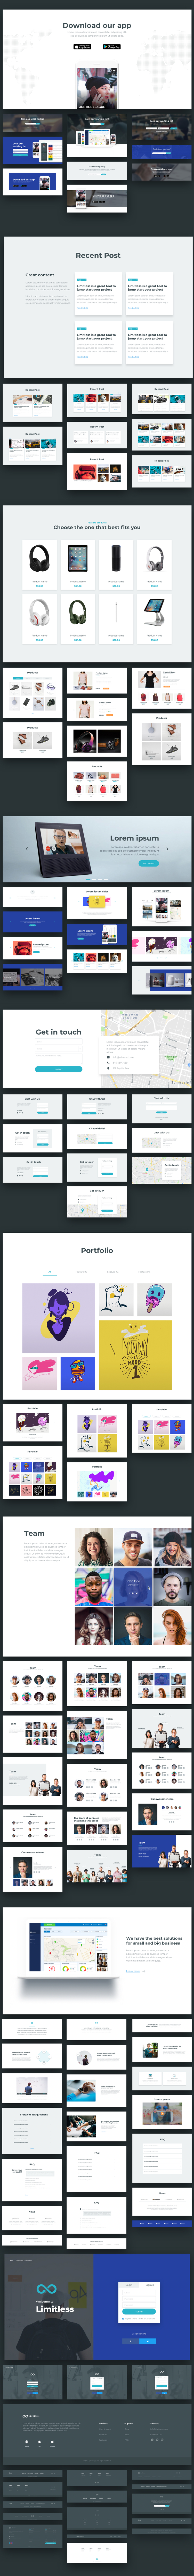 Limitless - Massive set of layouts and UI components for Sketch - 3